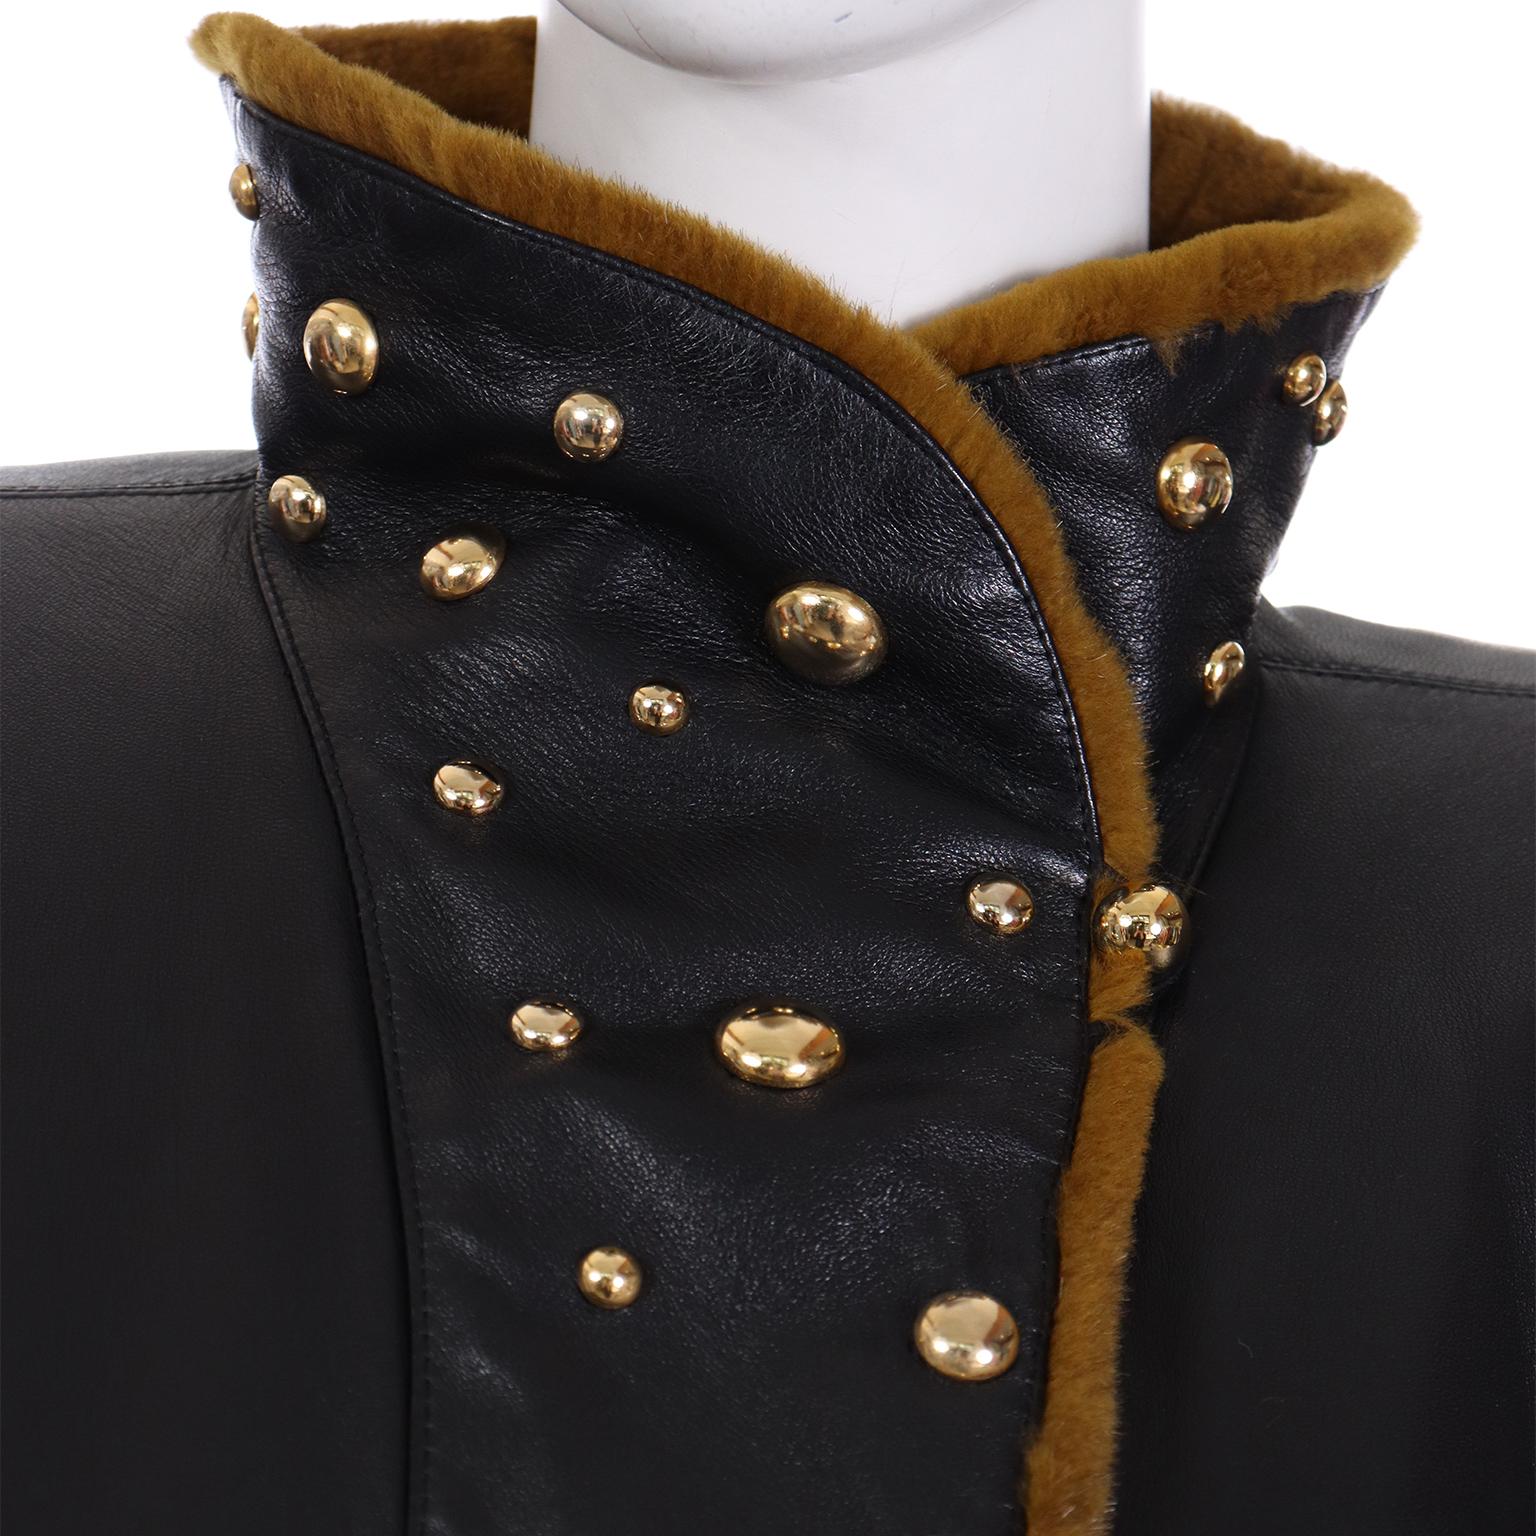 Yves Saint Laurent Vintage Black Leather YSL Coat W Sheared Fur and Gold Studs 2